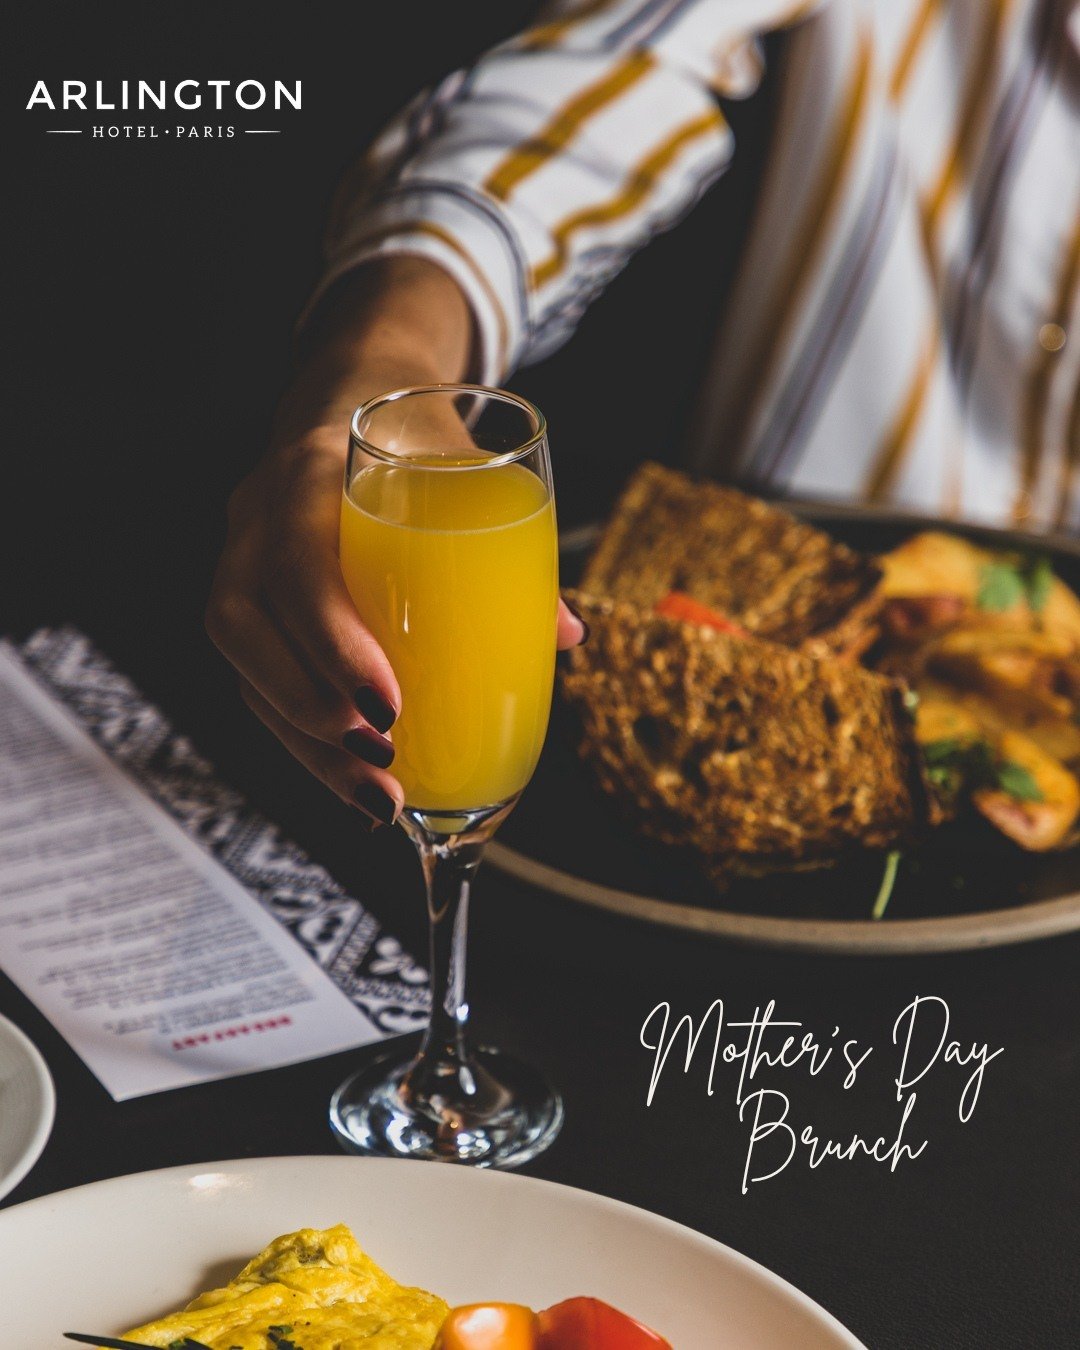 Treat Mom to the ultimate Mother's Day brunch at the Arlington Hotel! Indulge in a decadent spread of delicious dishes, from savory classics to sweet treats, crafted with love just for her. And what's brunch without bottomless mimosas? 🥂🍊 Sip and t